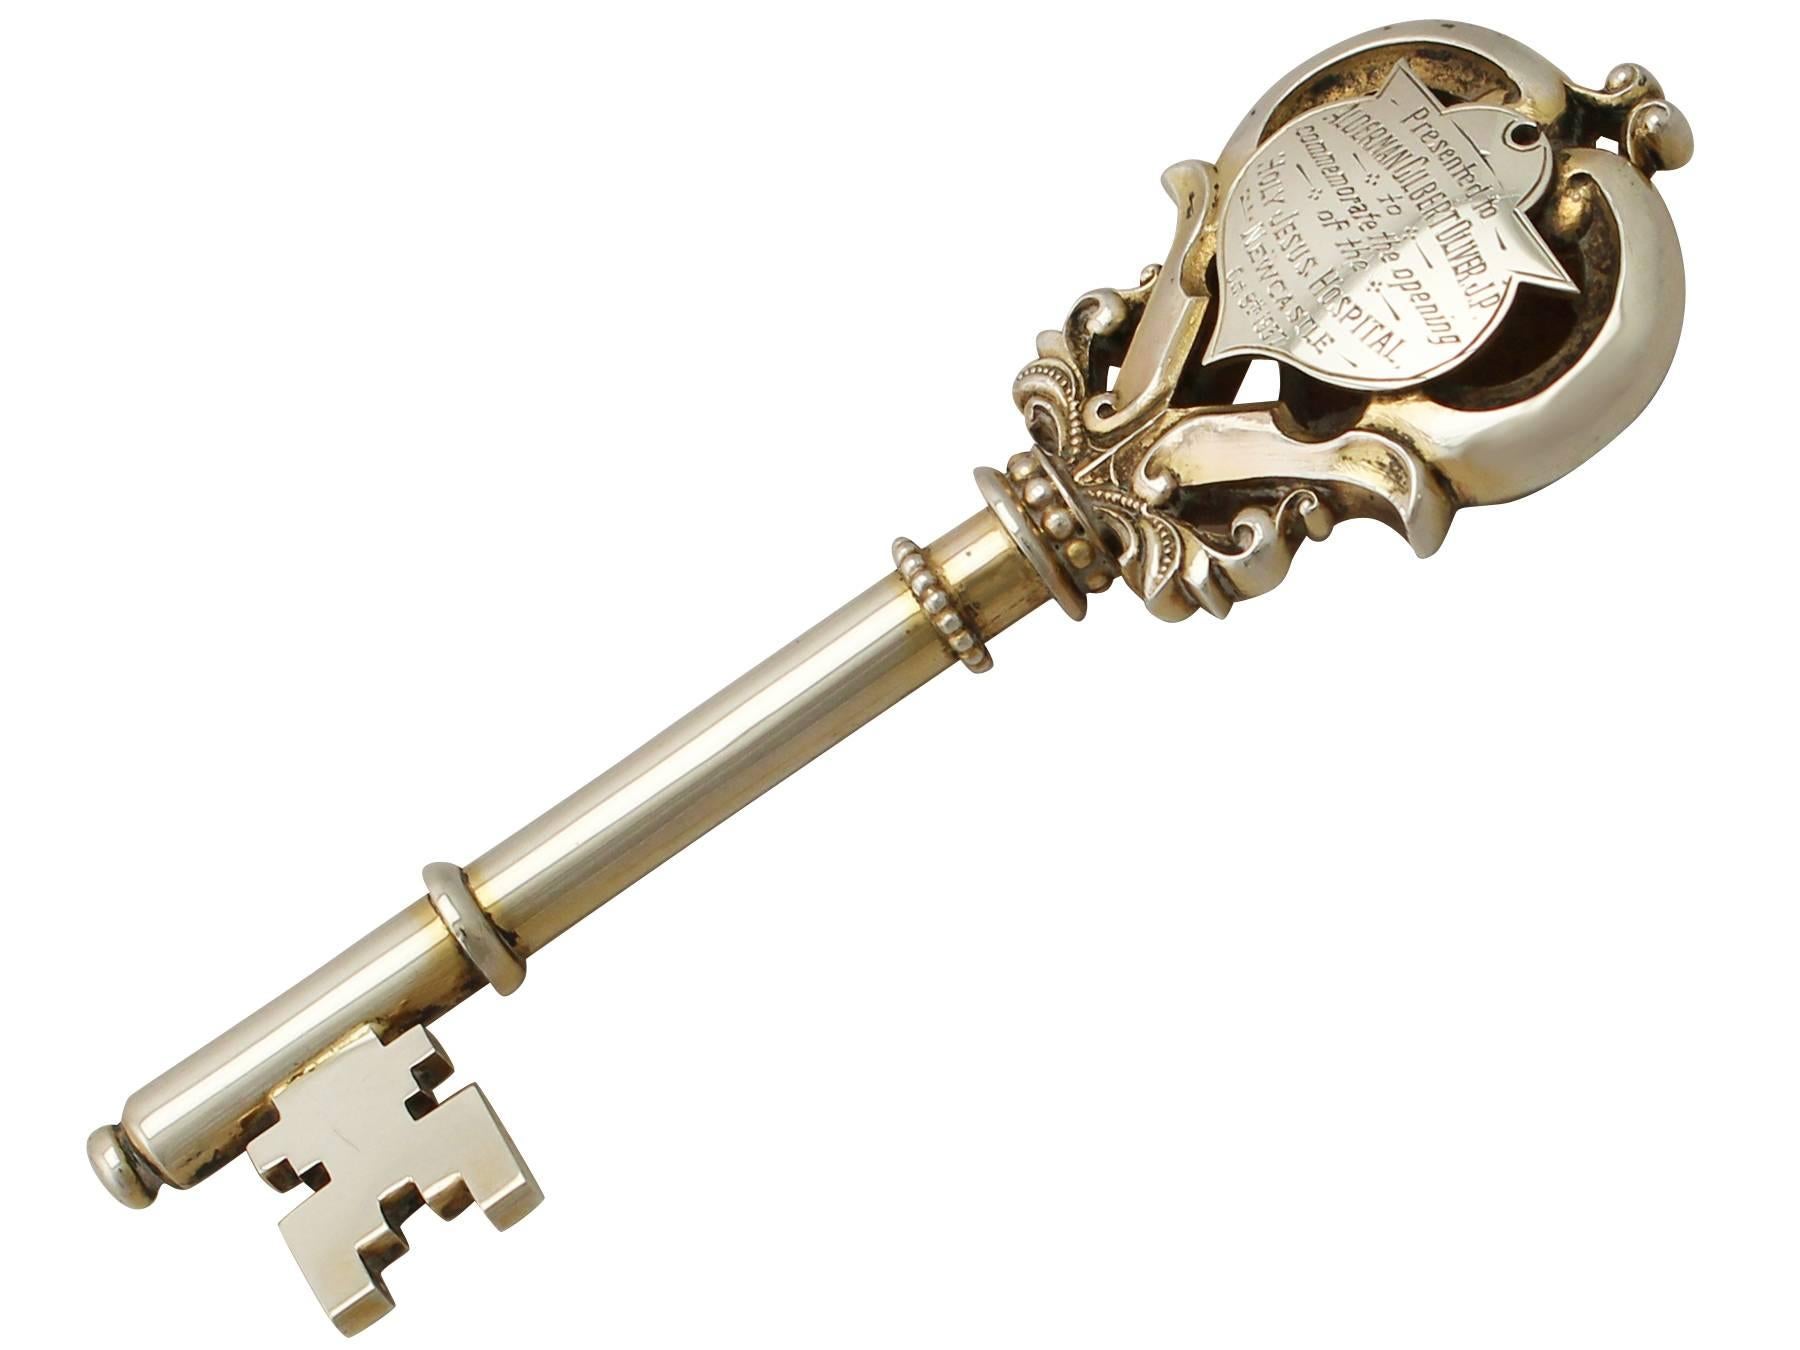 An exceptional, fine and impressive antique George V English sterling silver ceremonial/presentation key; an addition to our ornamental presentation collection.

This exceptional antique George V sterling silver presentation key has a rounded